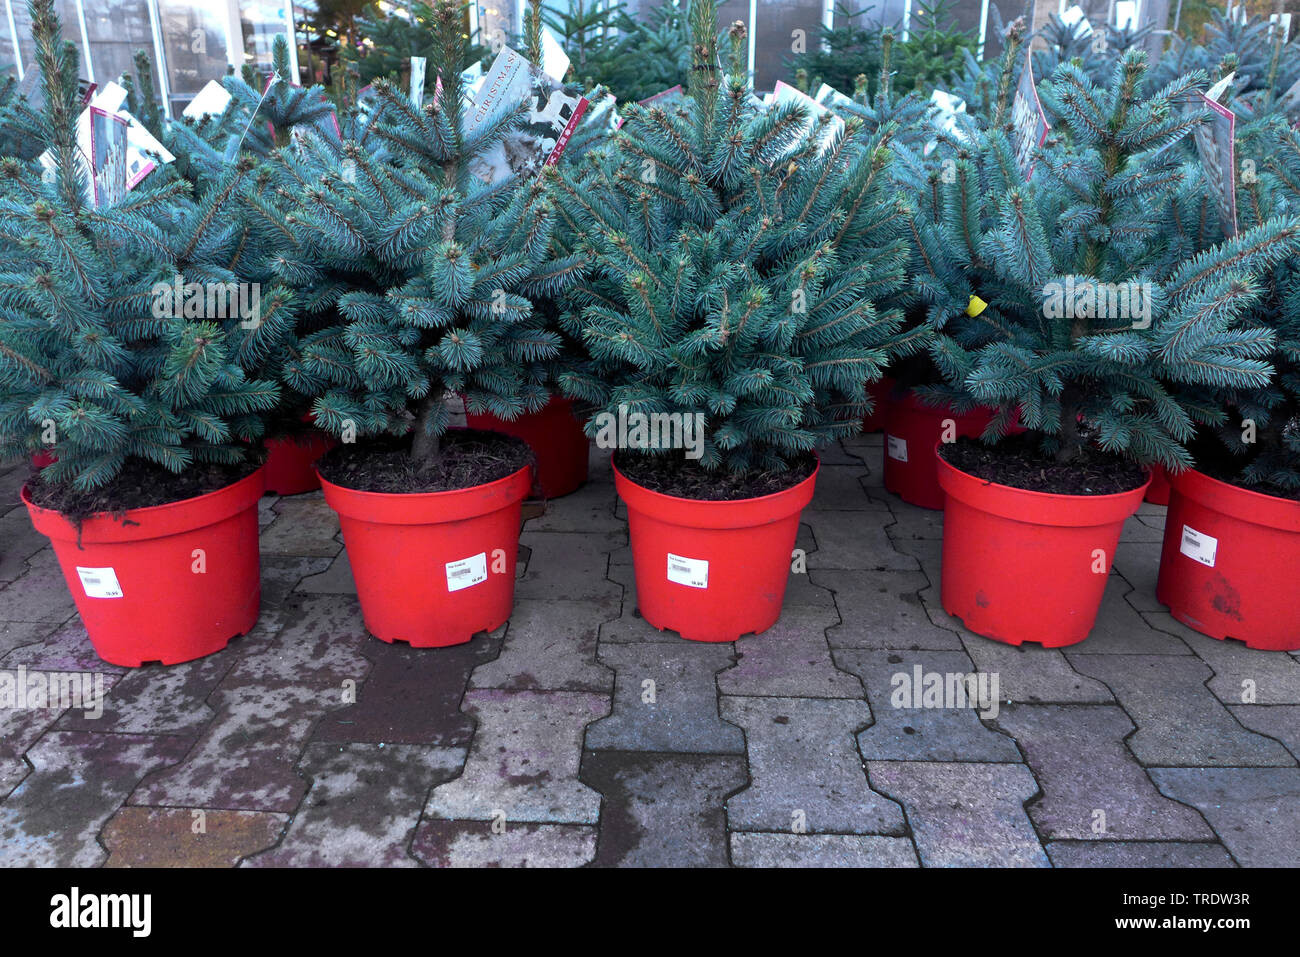 Colorado blue spruce (Picea pungens 'Glauca', Picea pungens Glauca), potted christams trees for sale, Germany Stock Photo